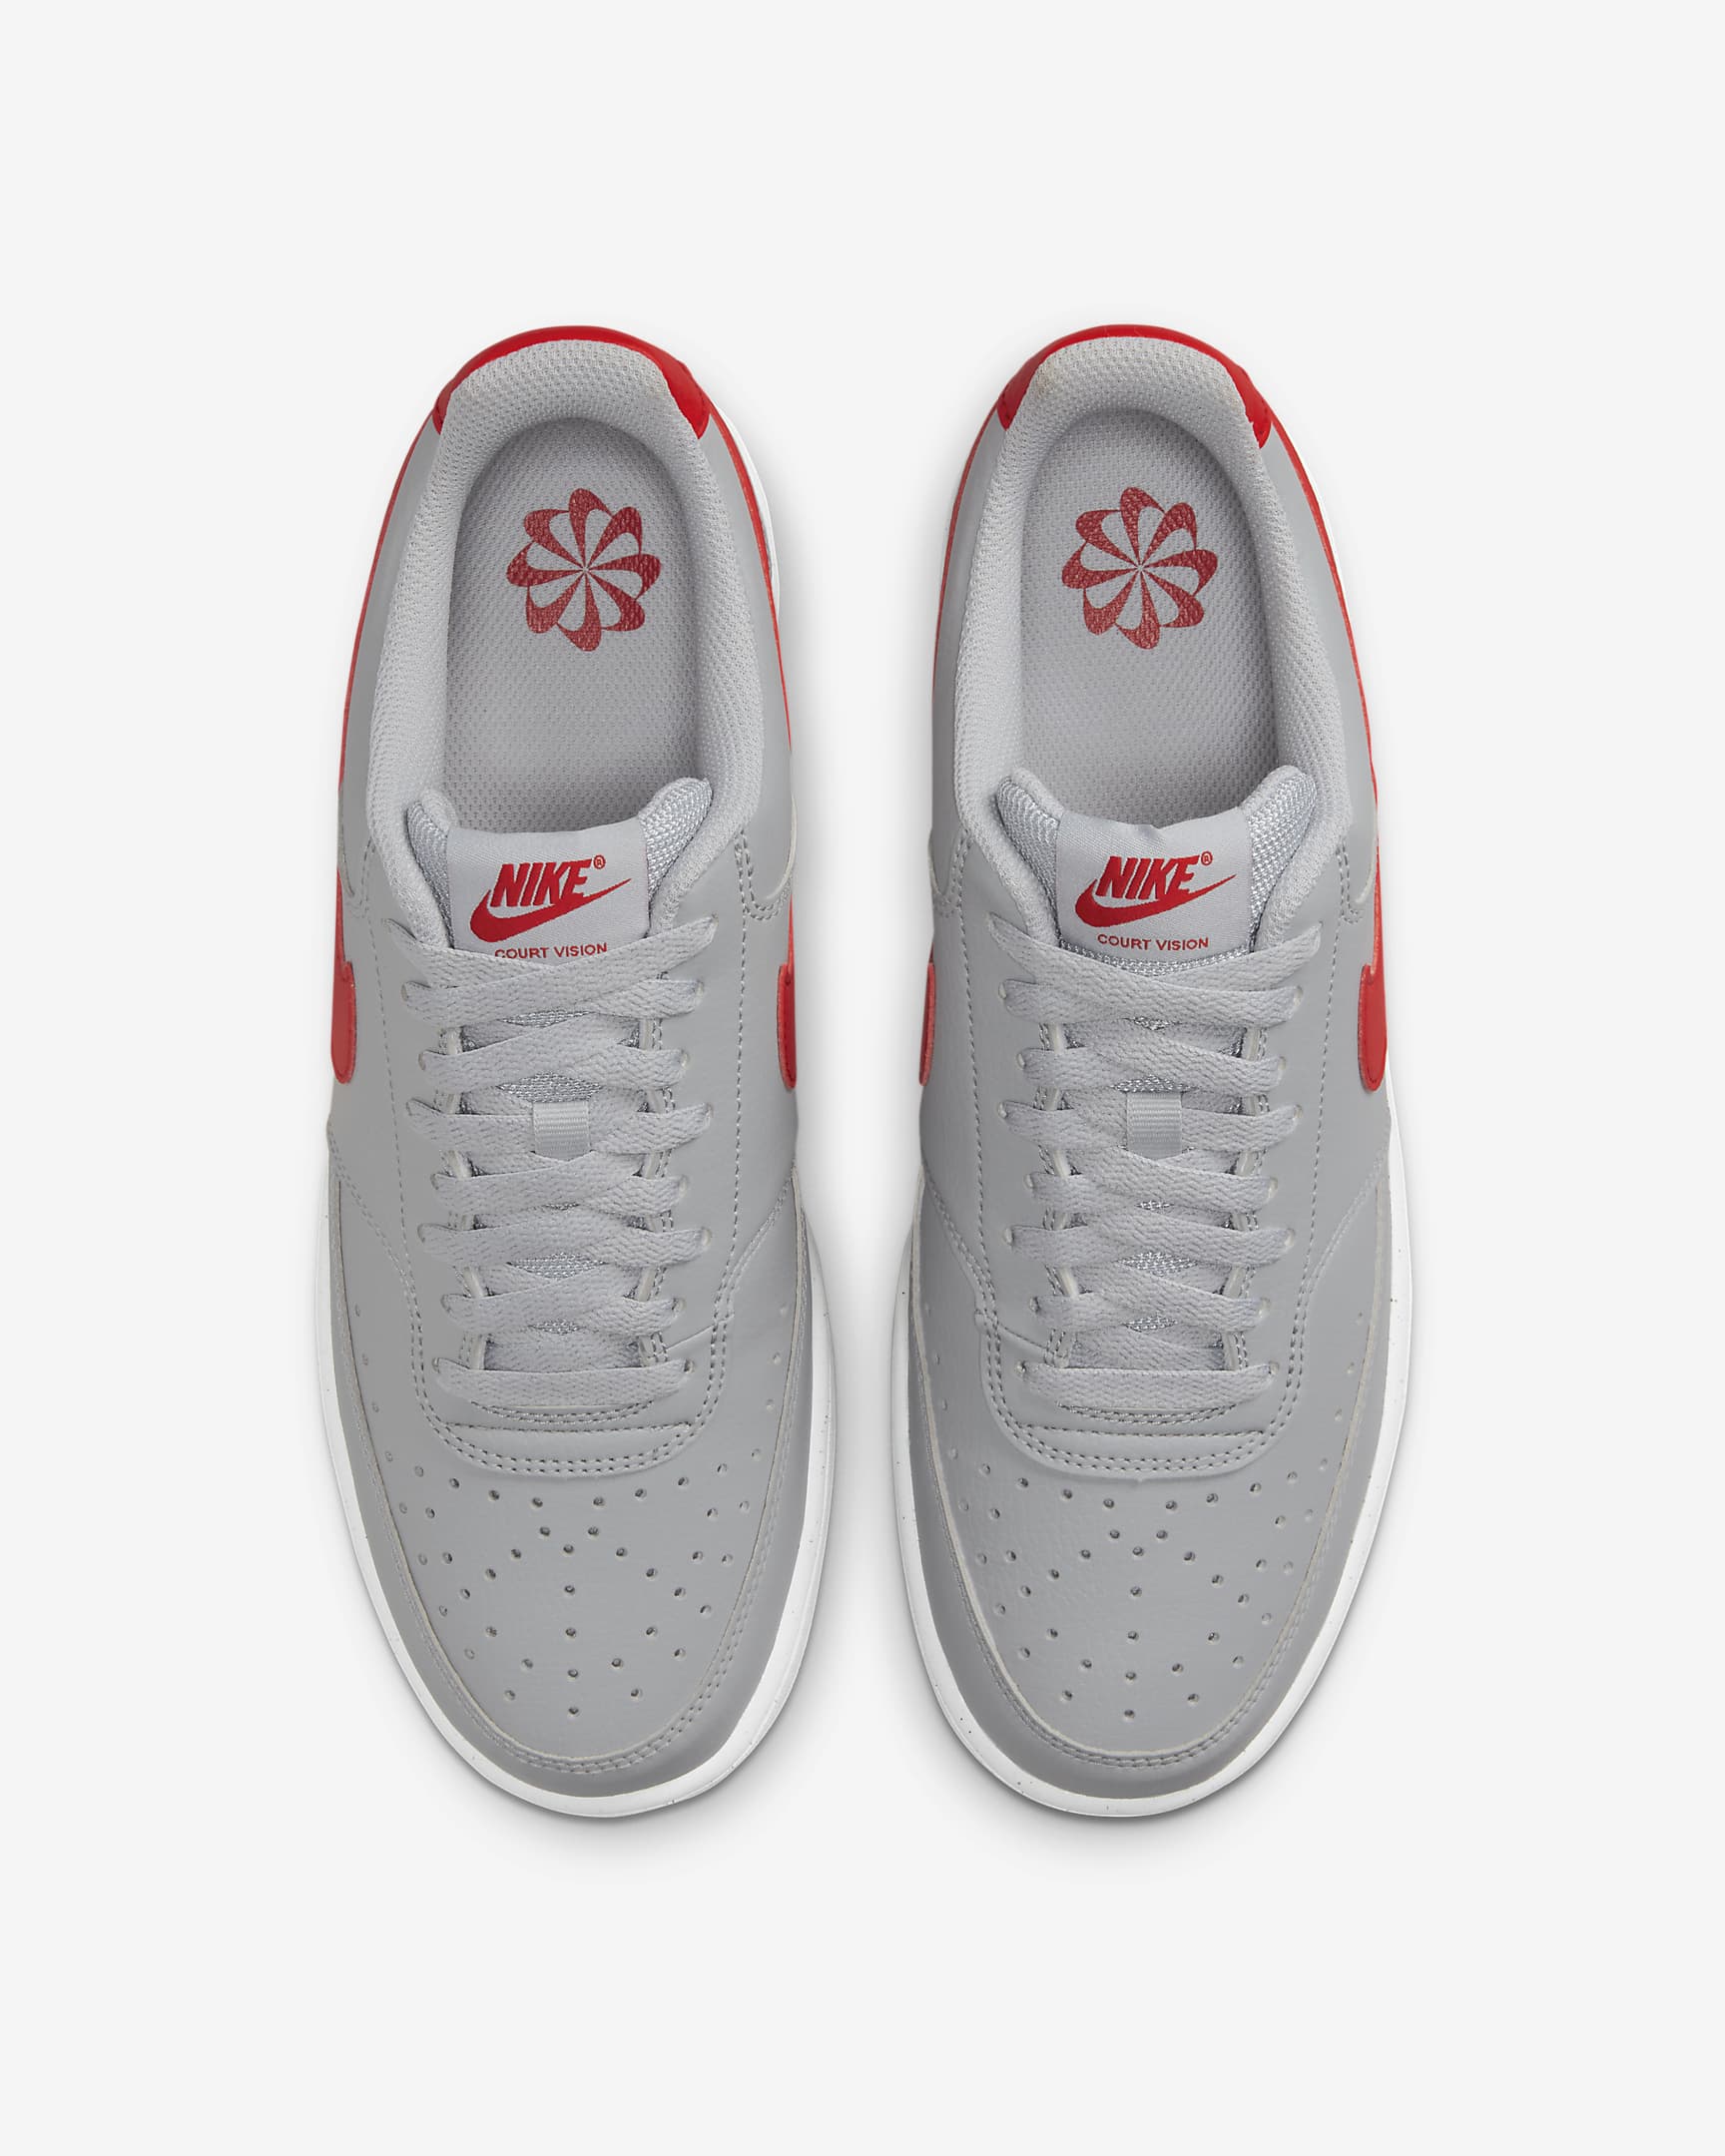 Nike Court Vision Low Next Nature Men's Shoes - Wolf Grey/White/University Red